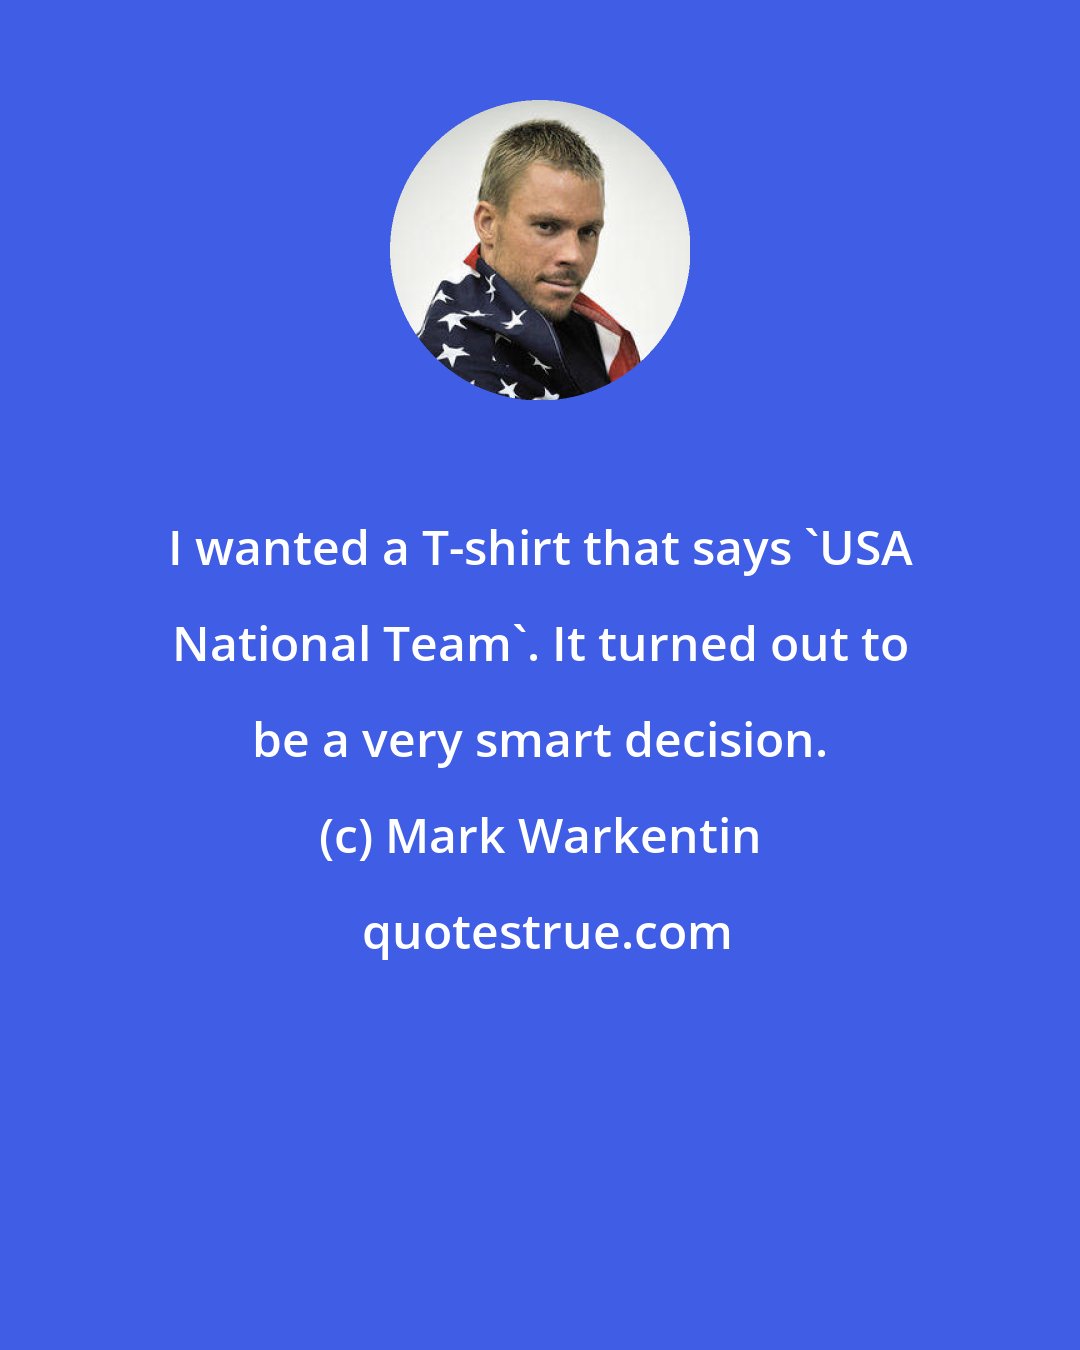 Mark Warkentin: I wanted a T-shirt that says 'USA National Team'. It turned out to be a very smart decision.